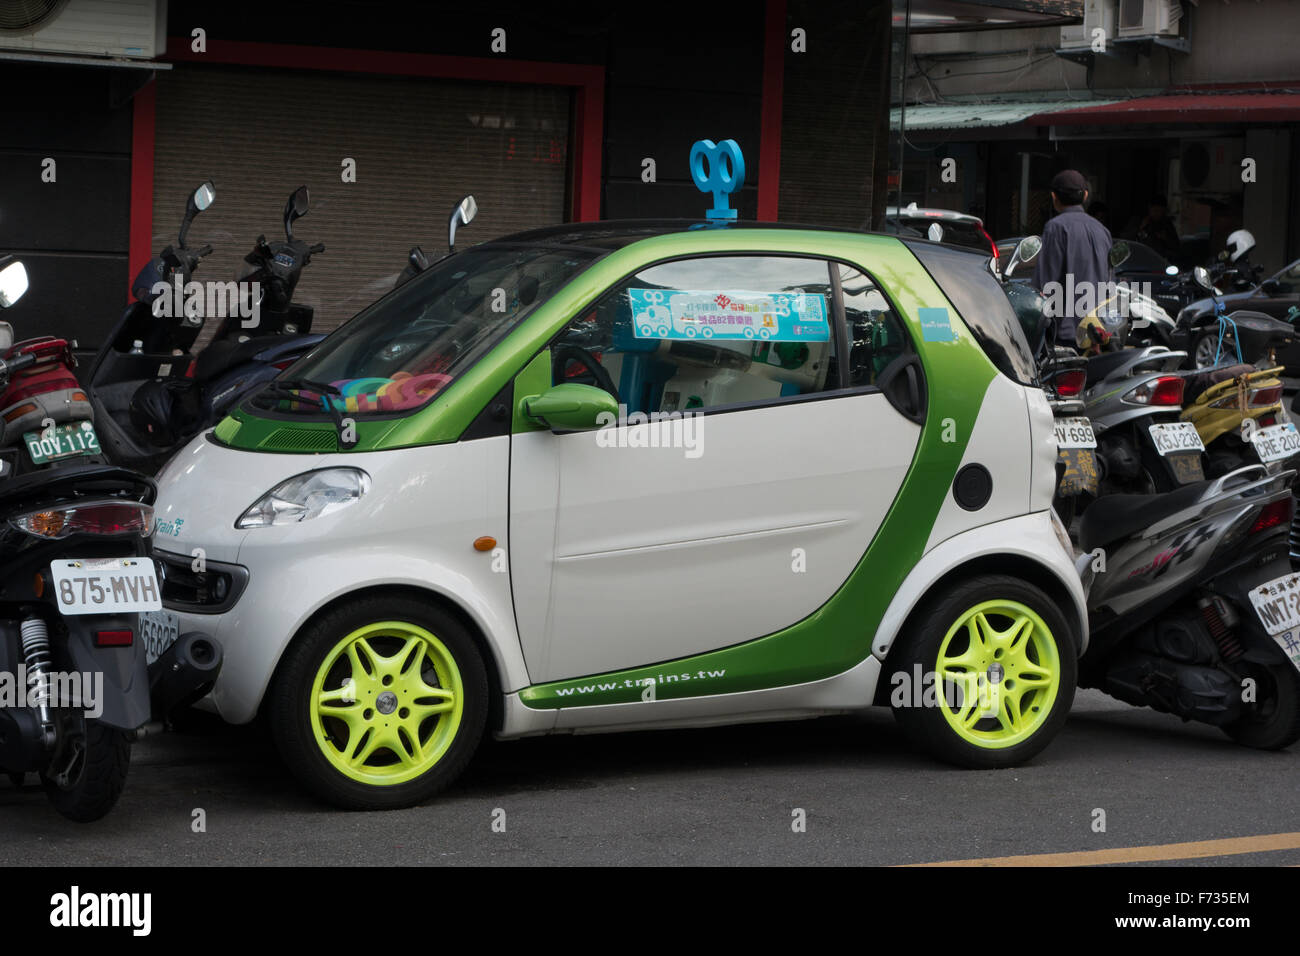 smart car parking tight space Stock Photo